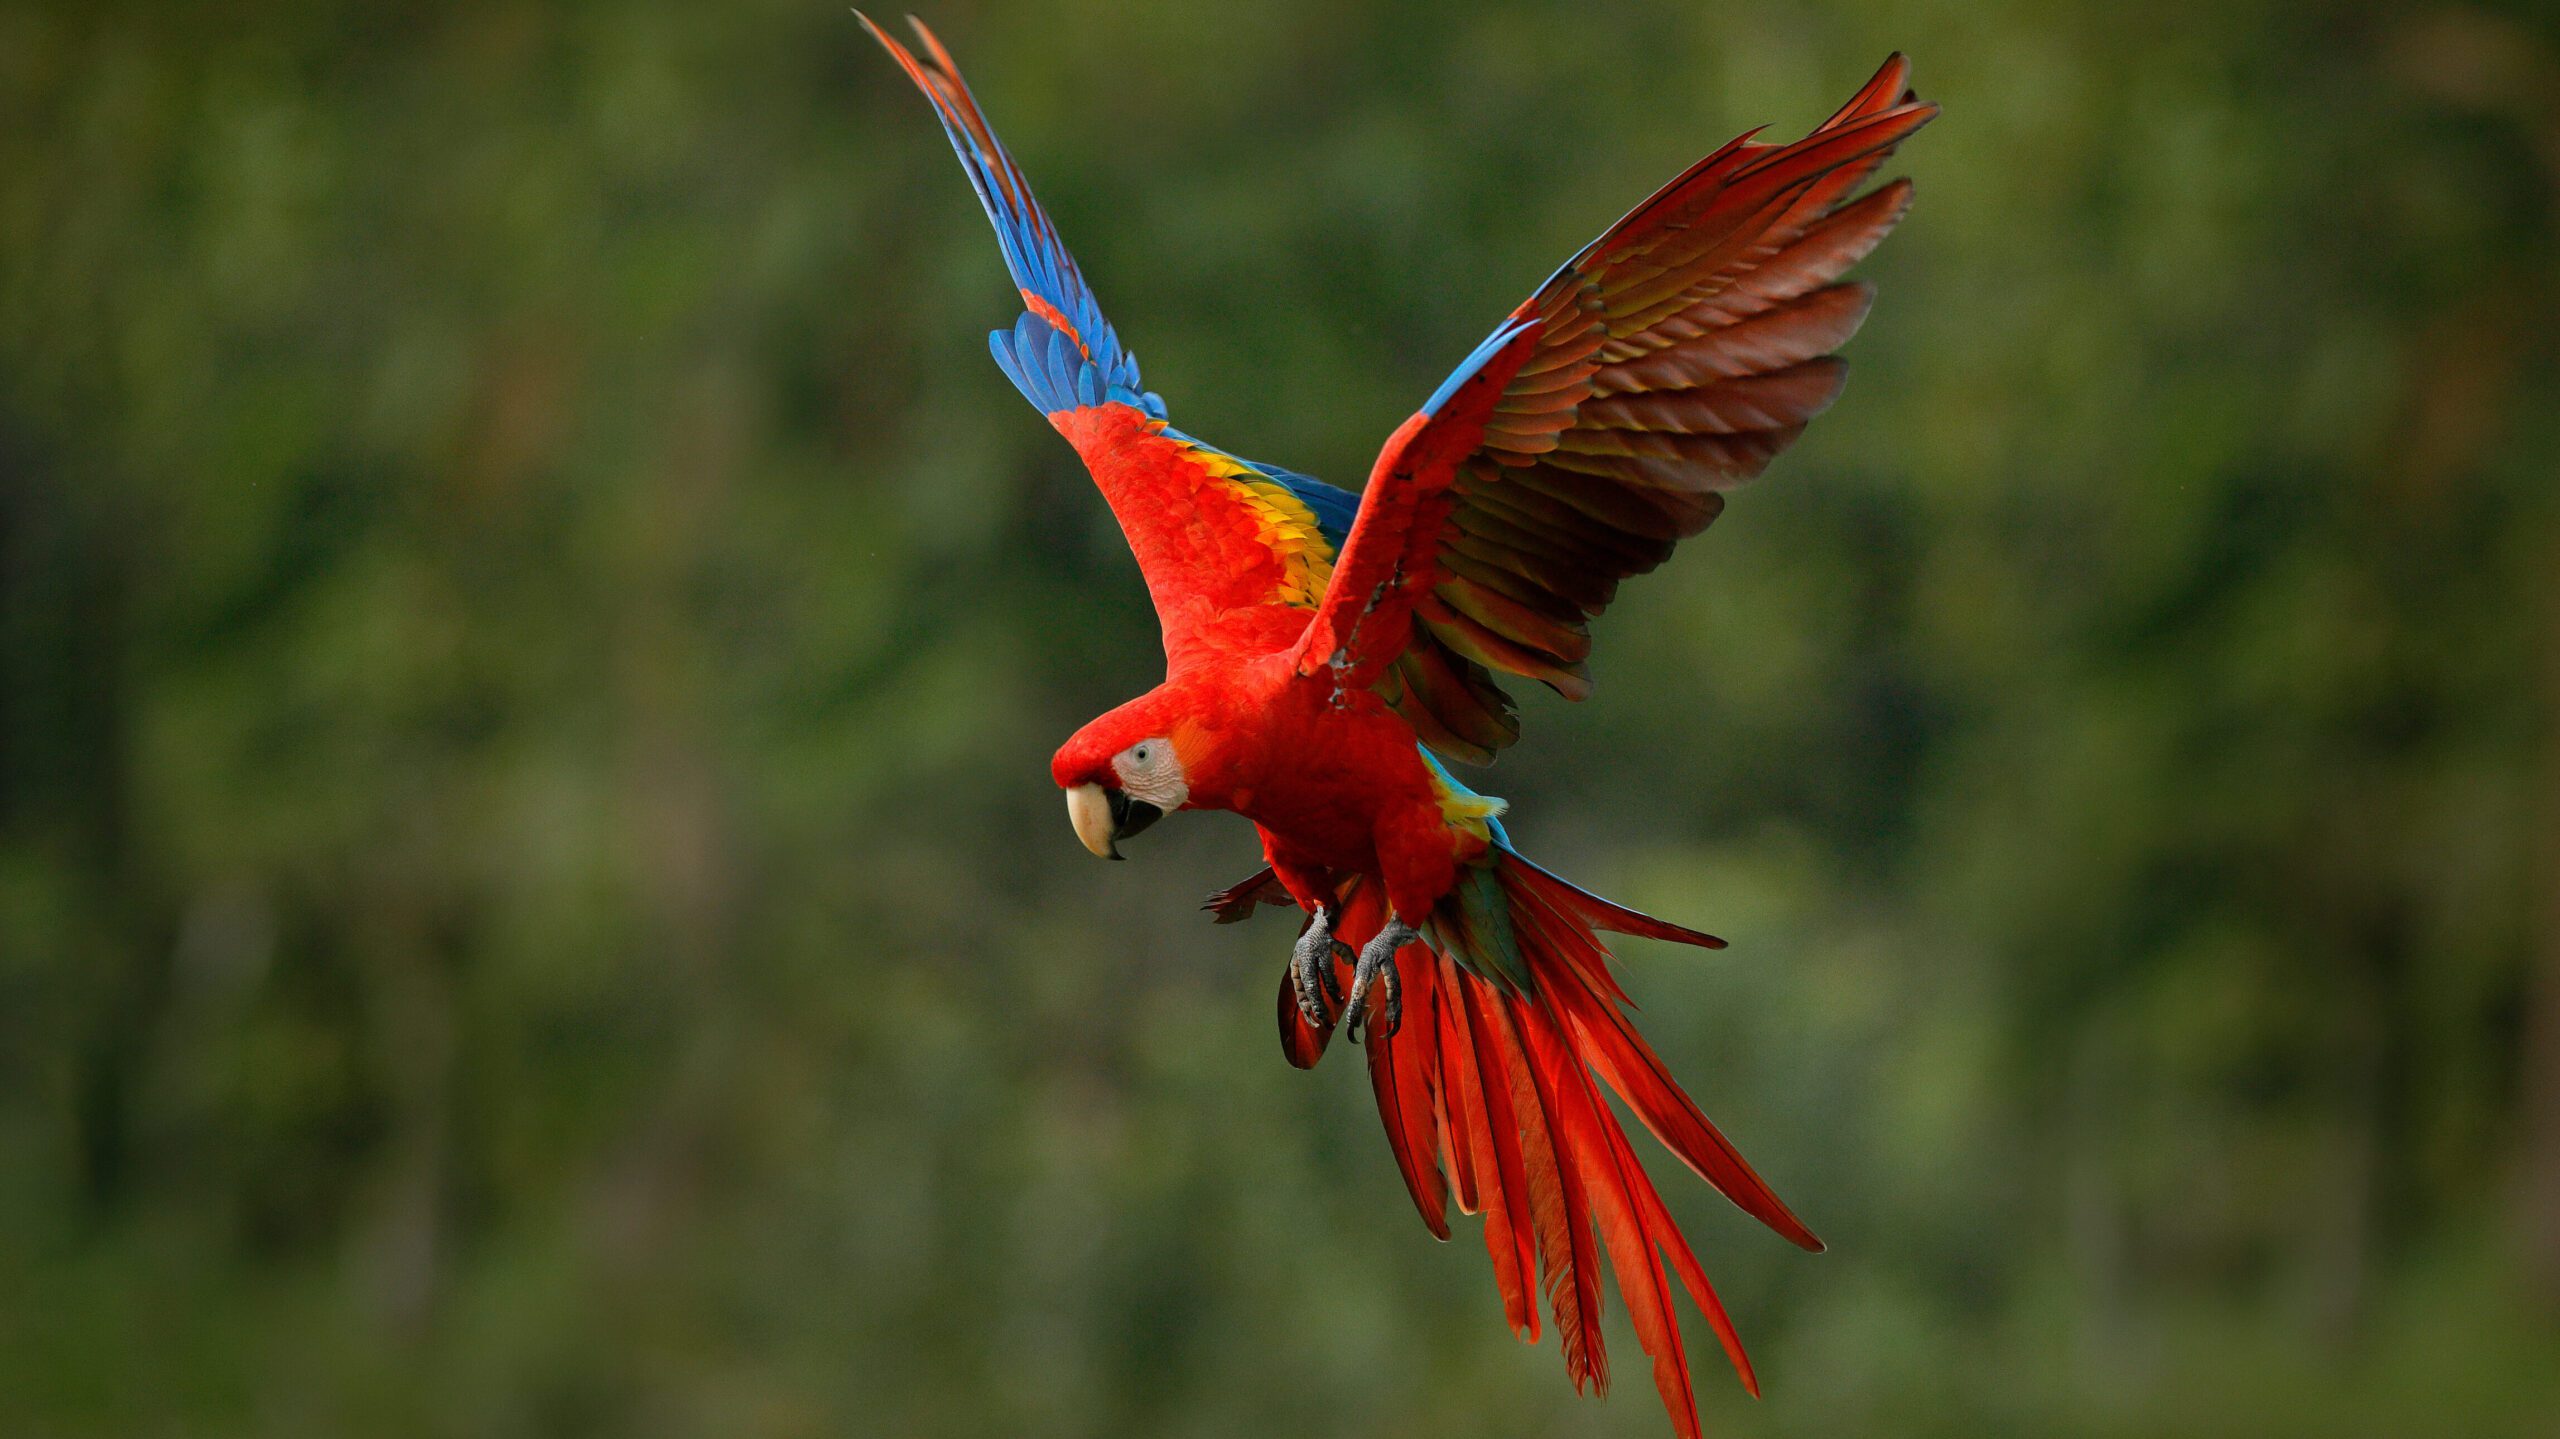 Macaws are large parrots known for their vibrant colors and impressive personalities. While they can be playful, intelligent, and entertaining companions, they also require proper care, attention, and socialization.